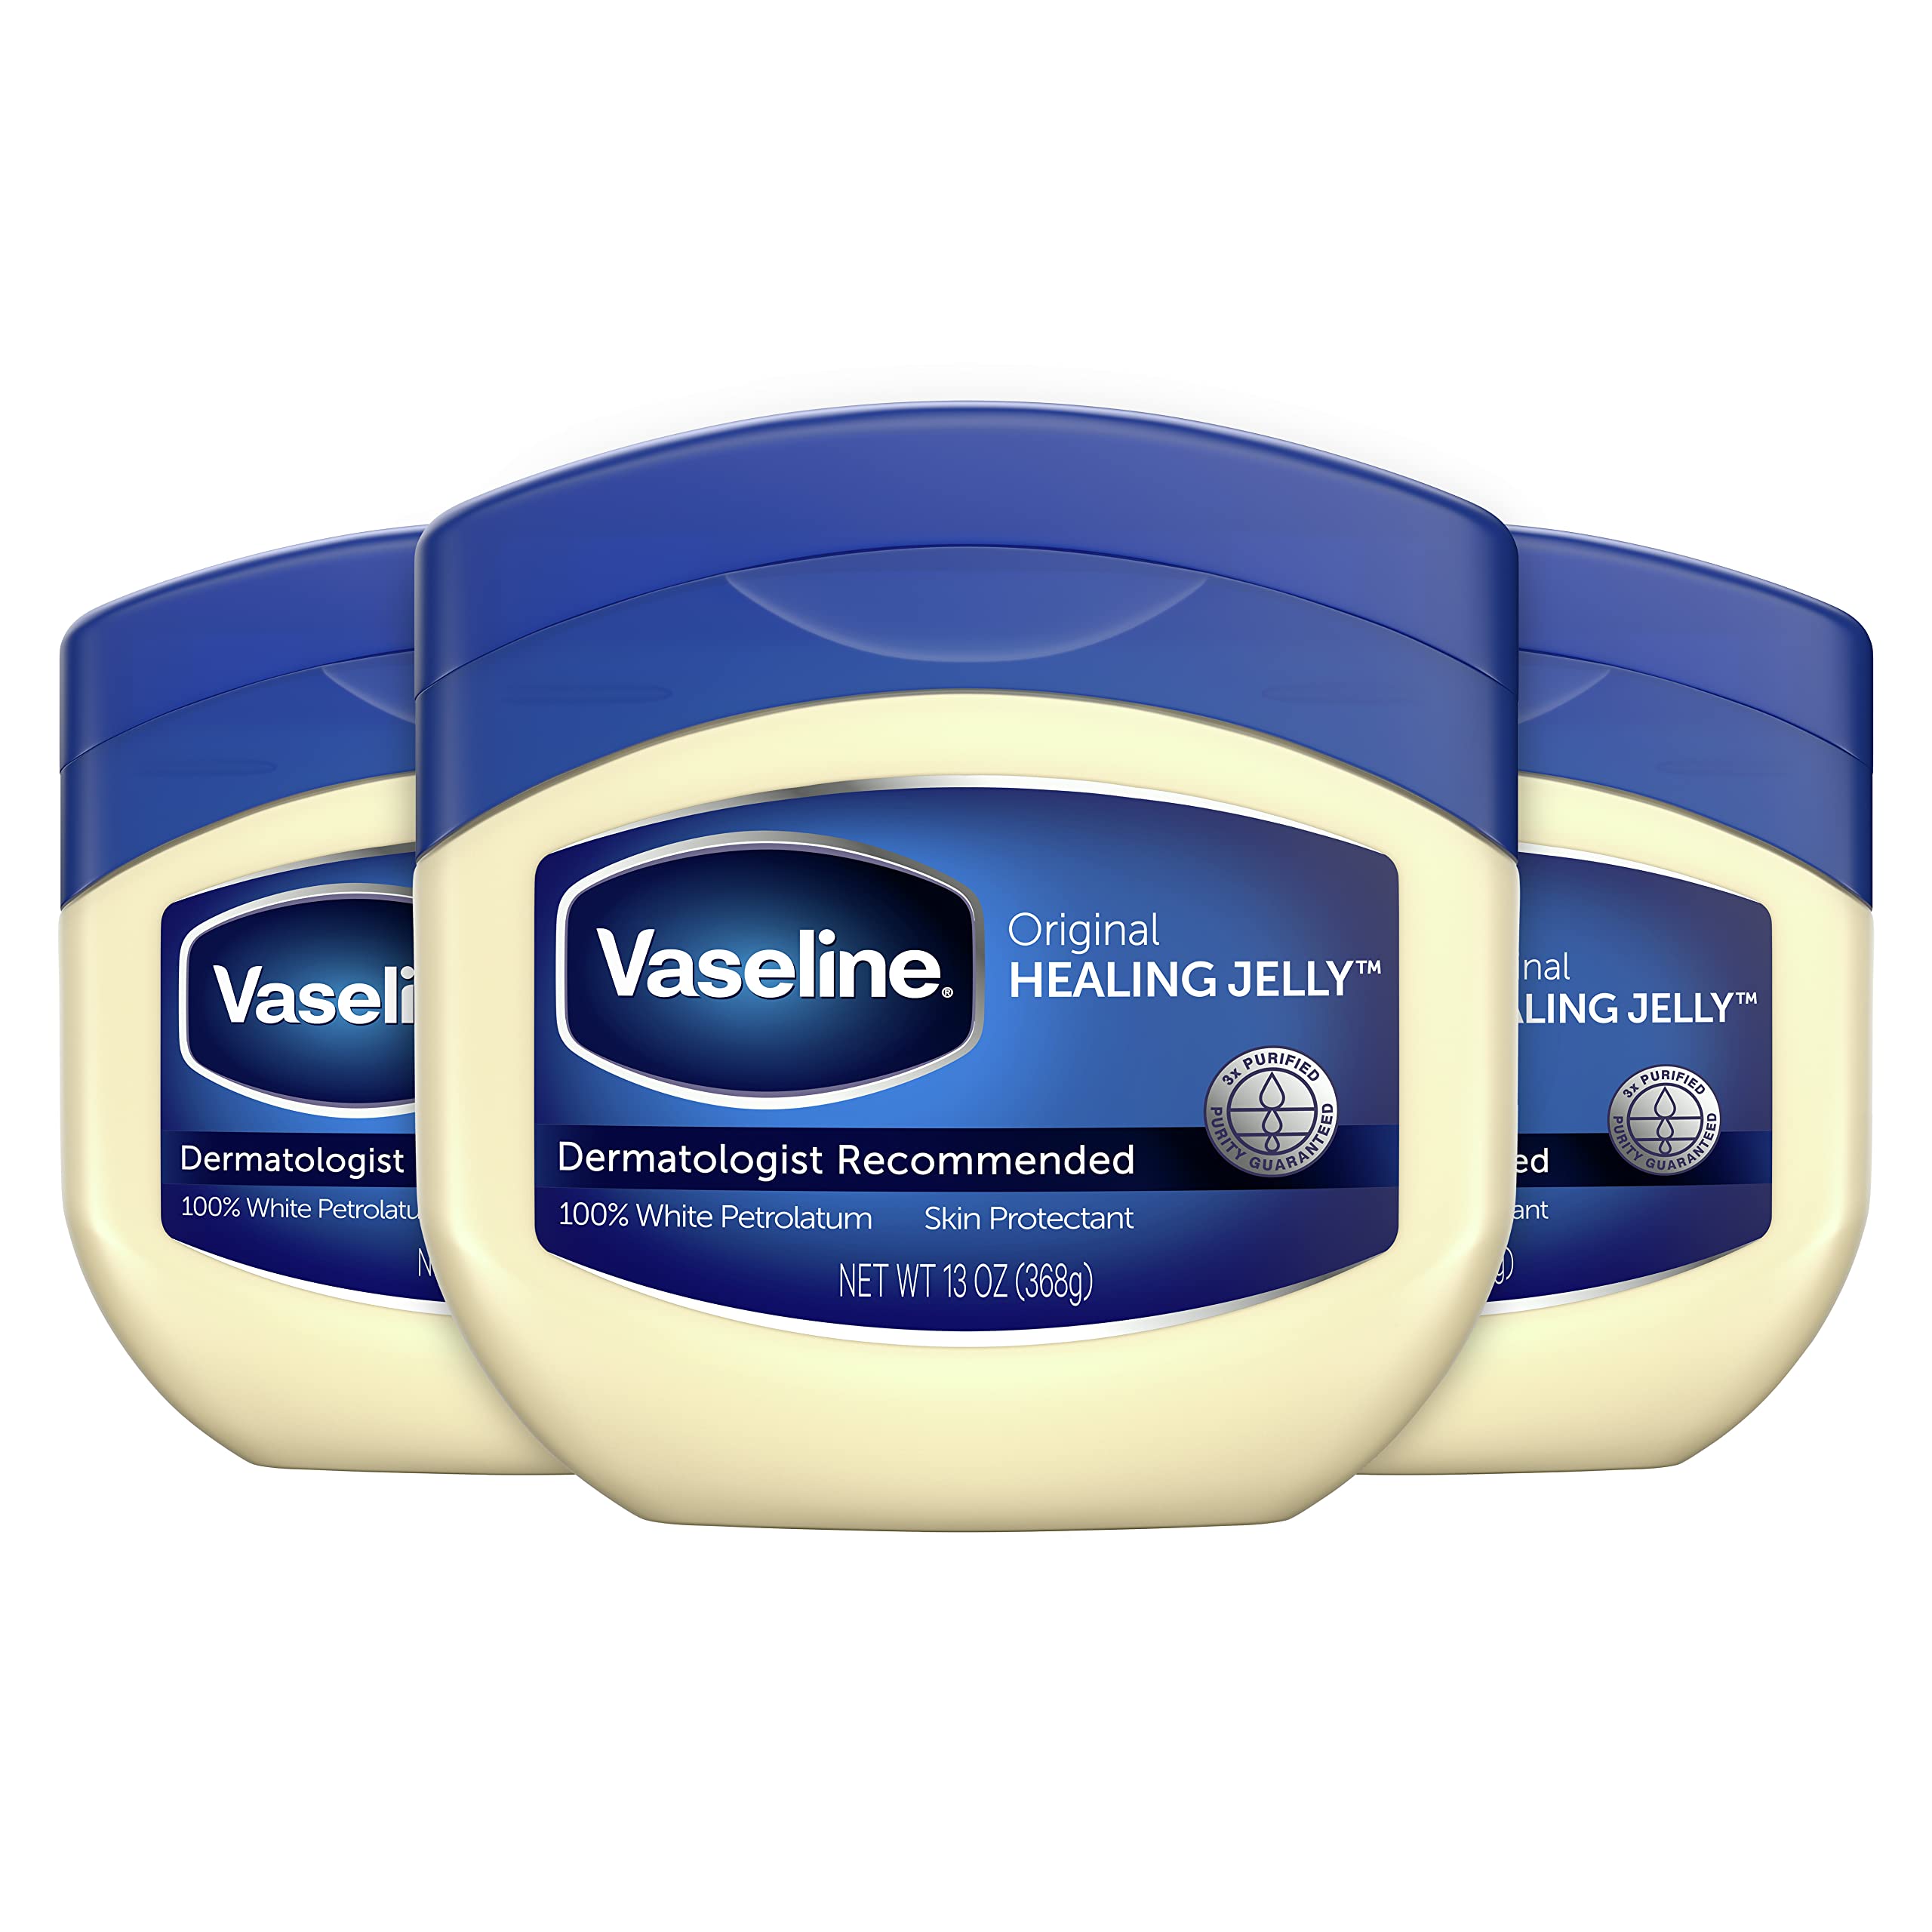 Vaseline Petroleum Jelly Original 3 Count Provides Dry Skin Relief And Protects Minor Cuts Dermatologist Recommended And Locks In Moisture 13 Ounce (Pack of 3)